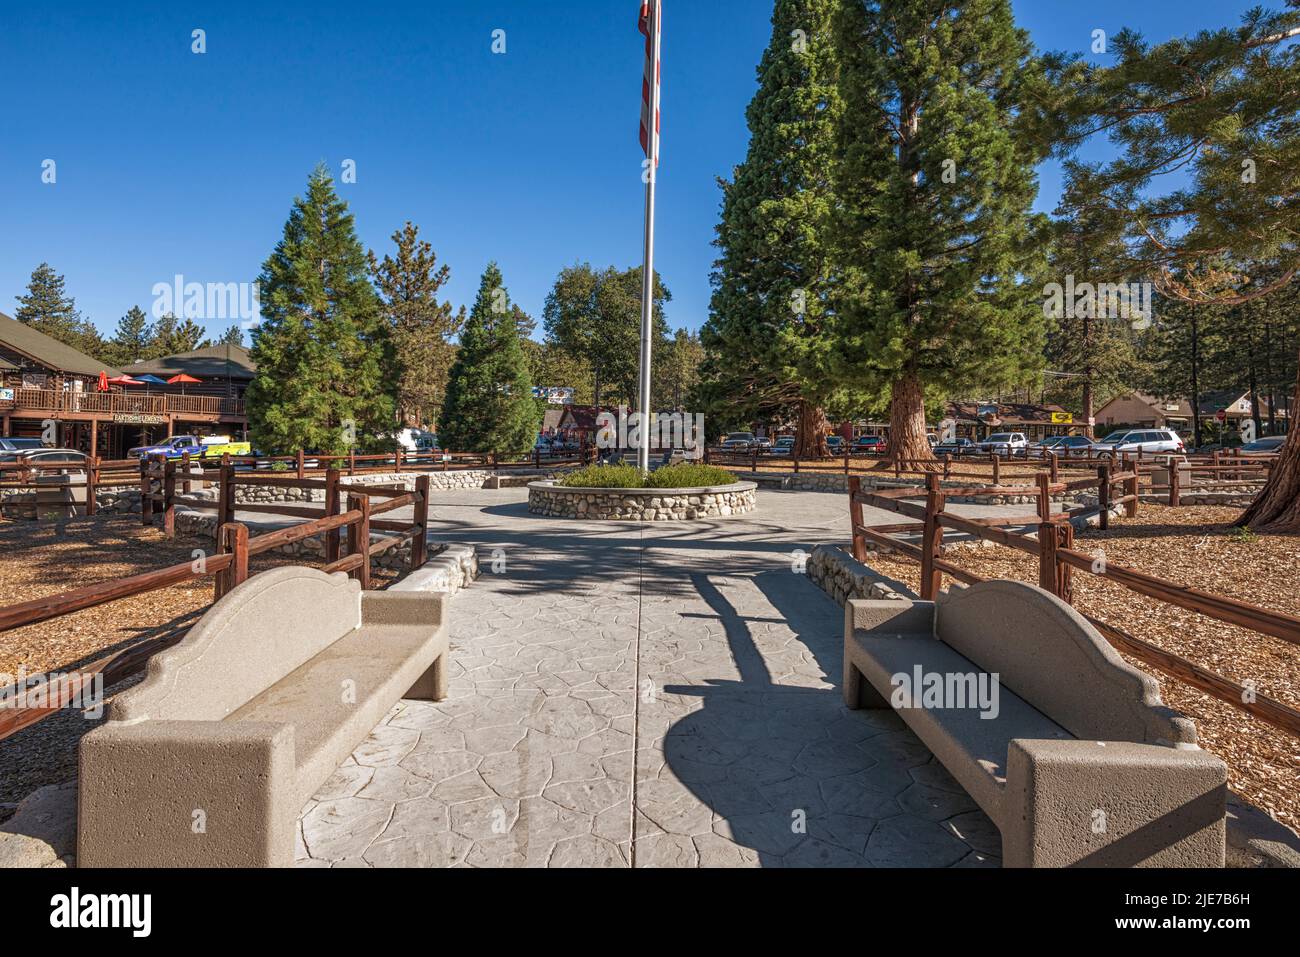 The center of town in Idyllwild, California, USA. Stock Photo